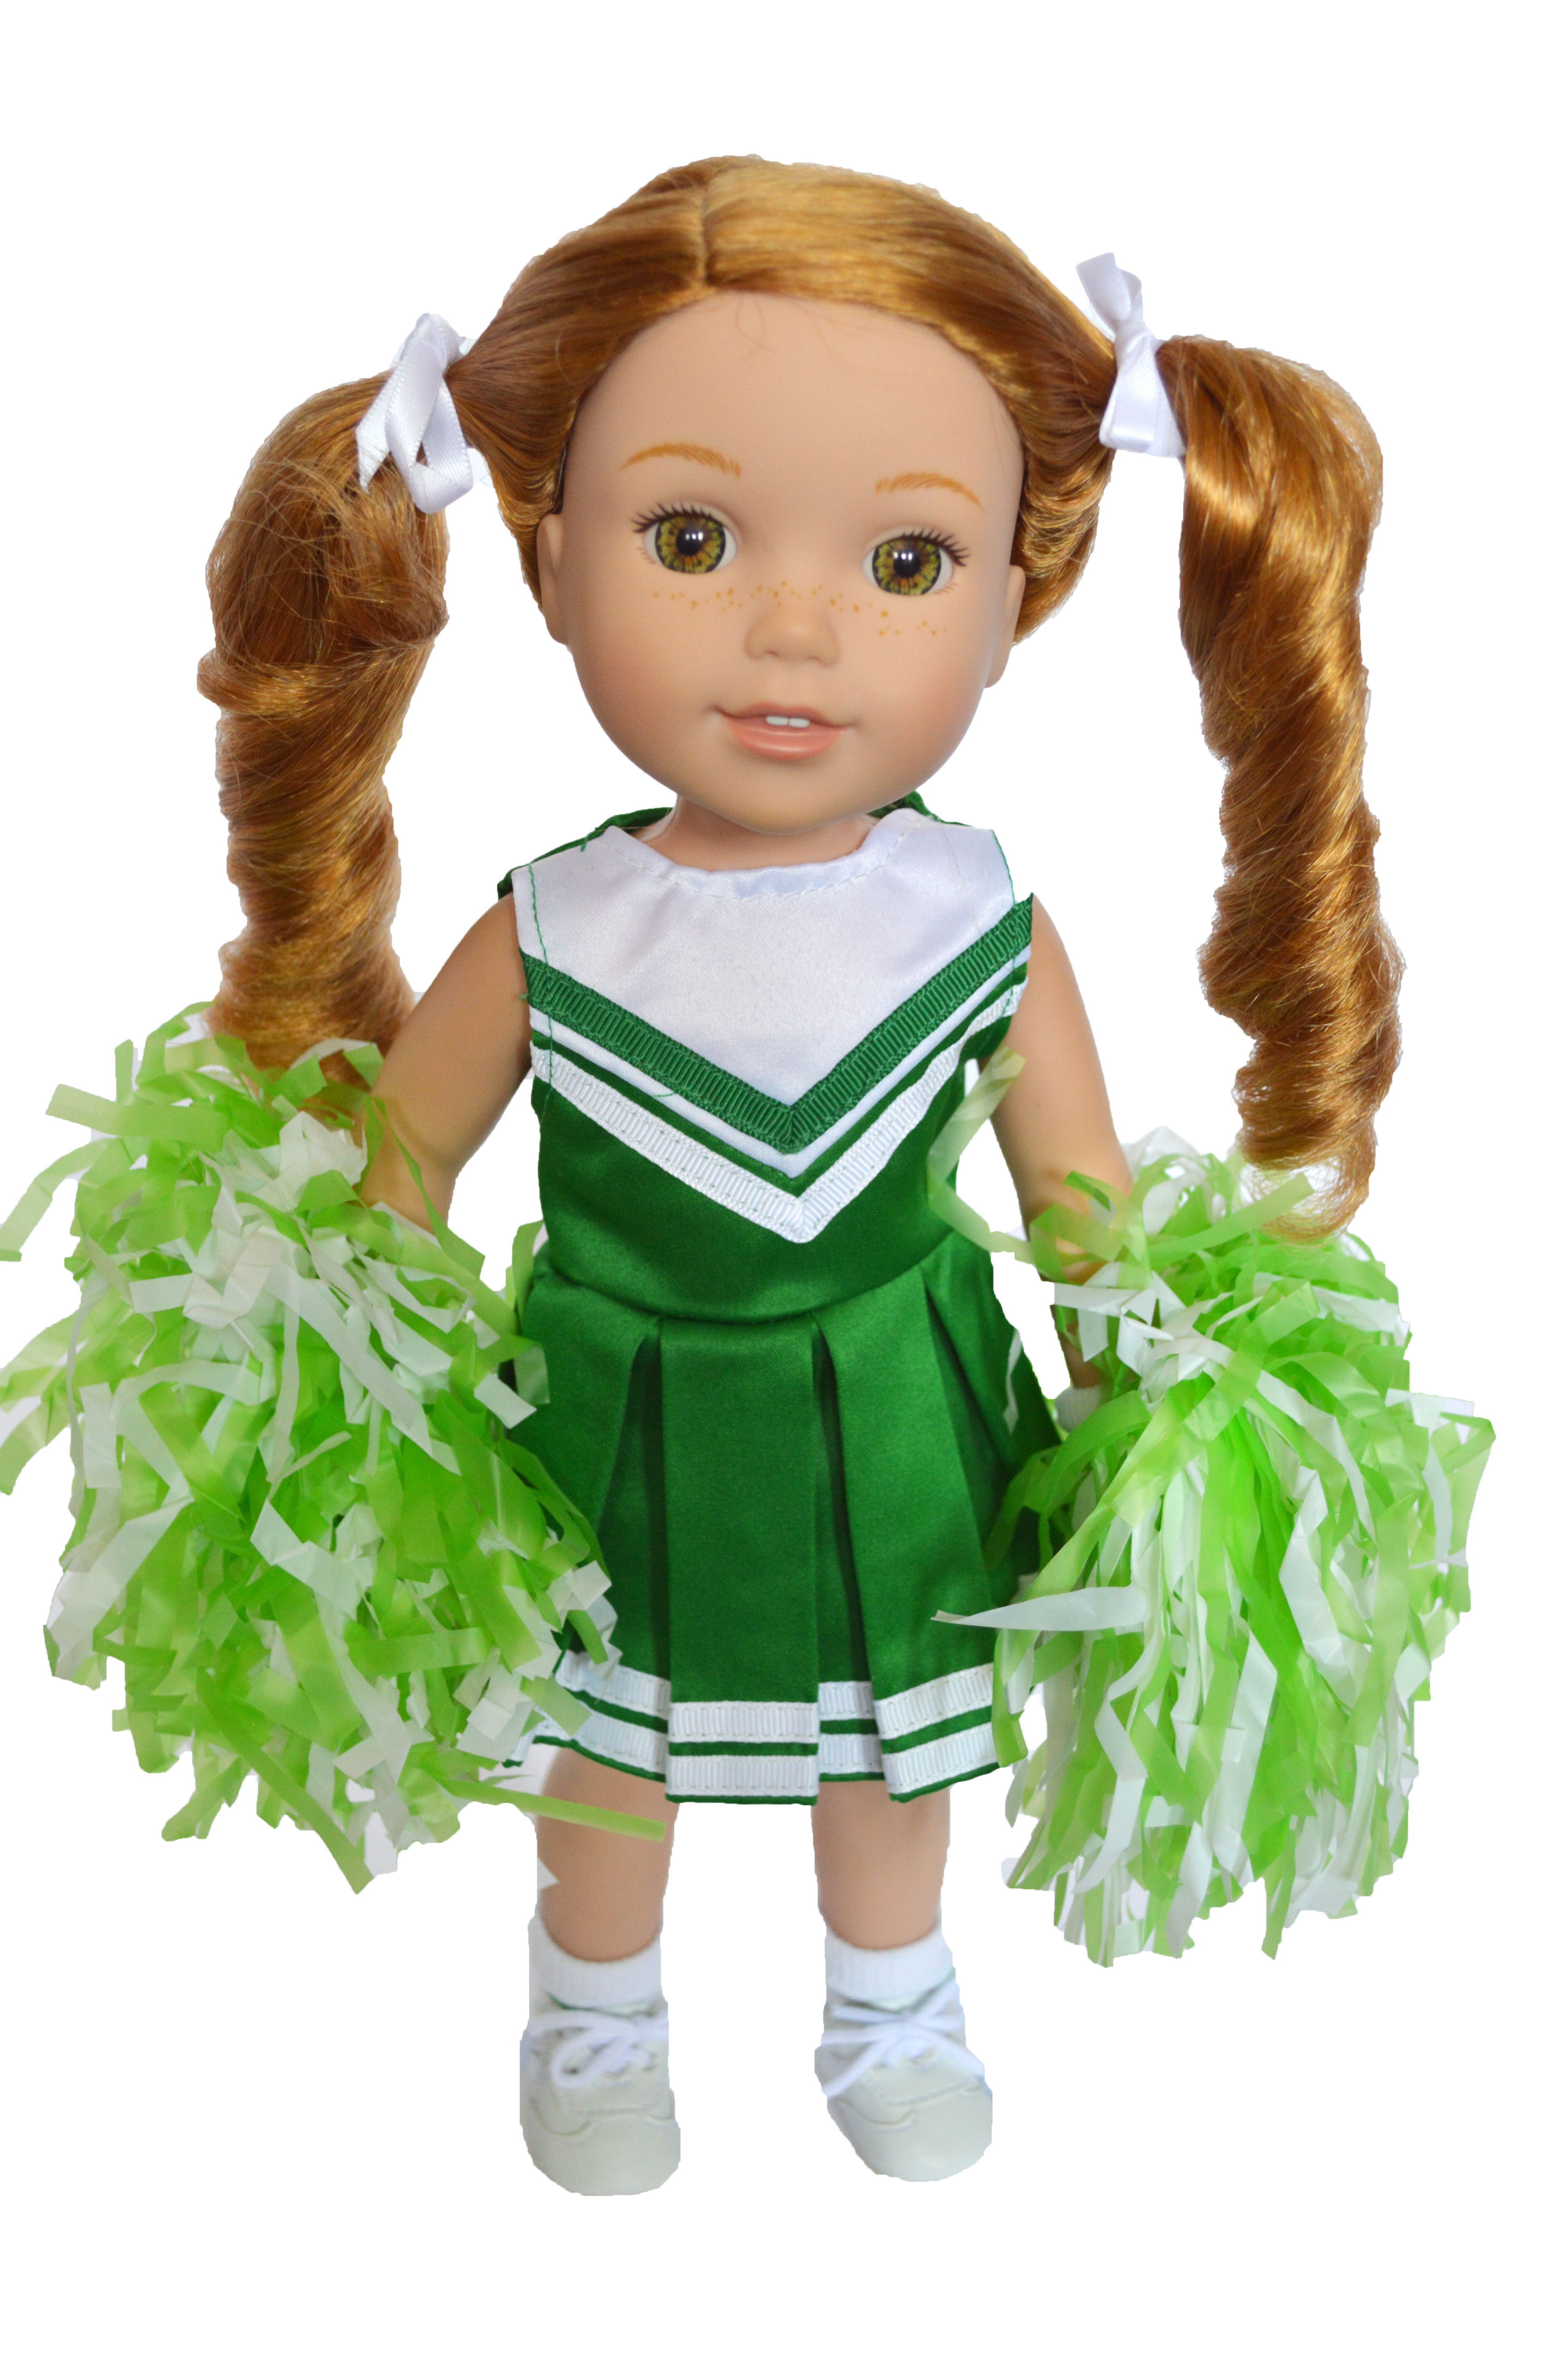 Green and White Cheerleader Outfit for Wellie Wisher Dolls